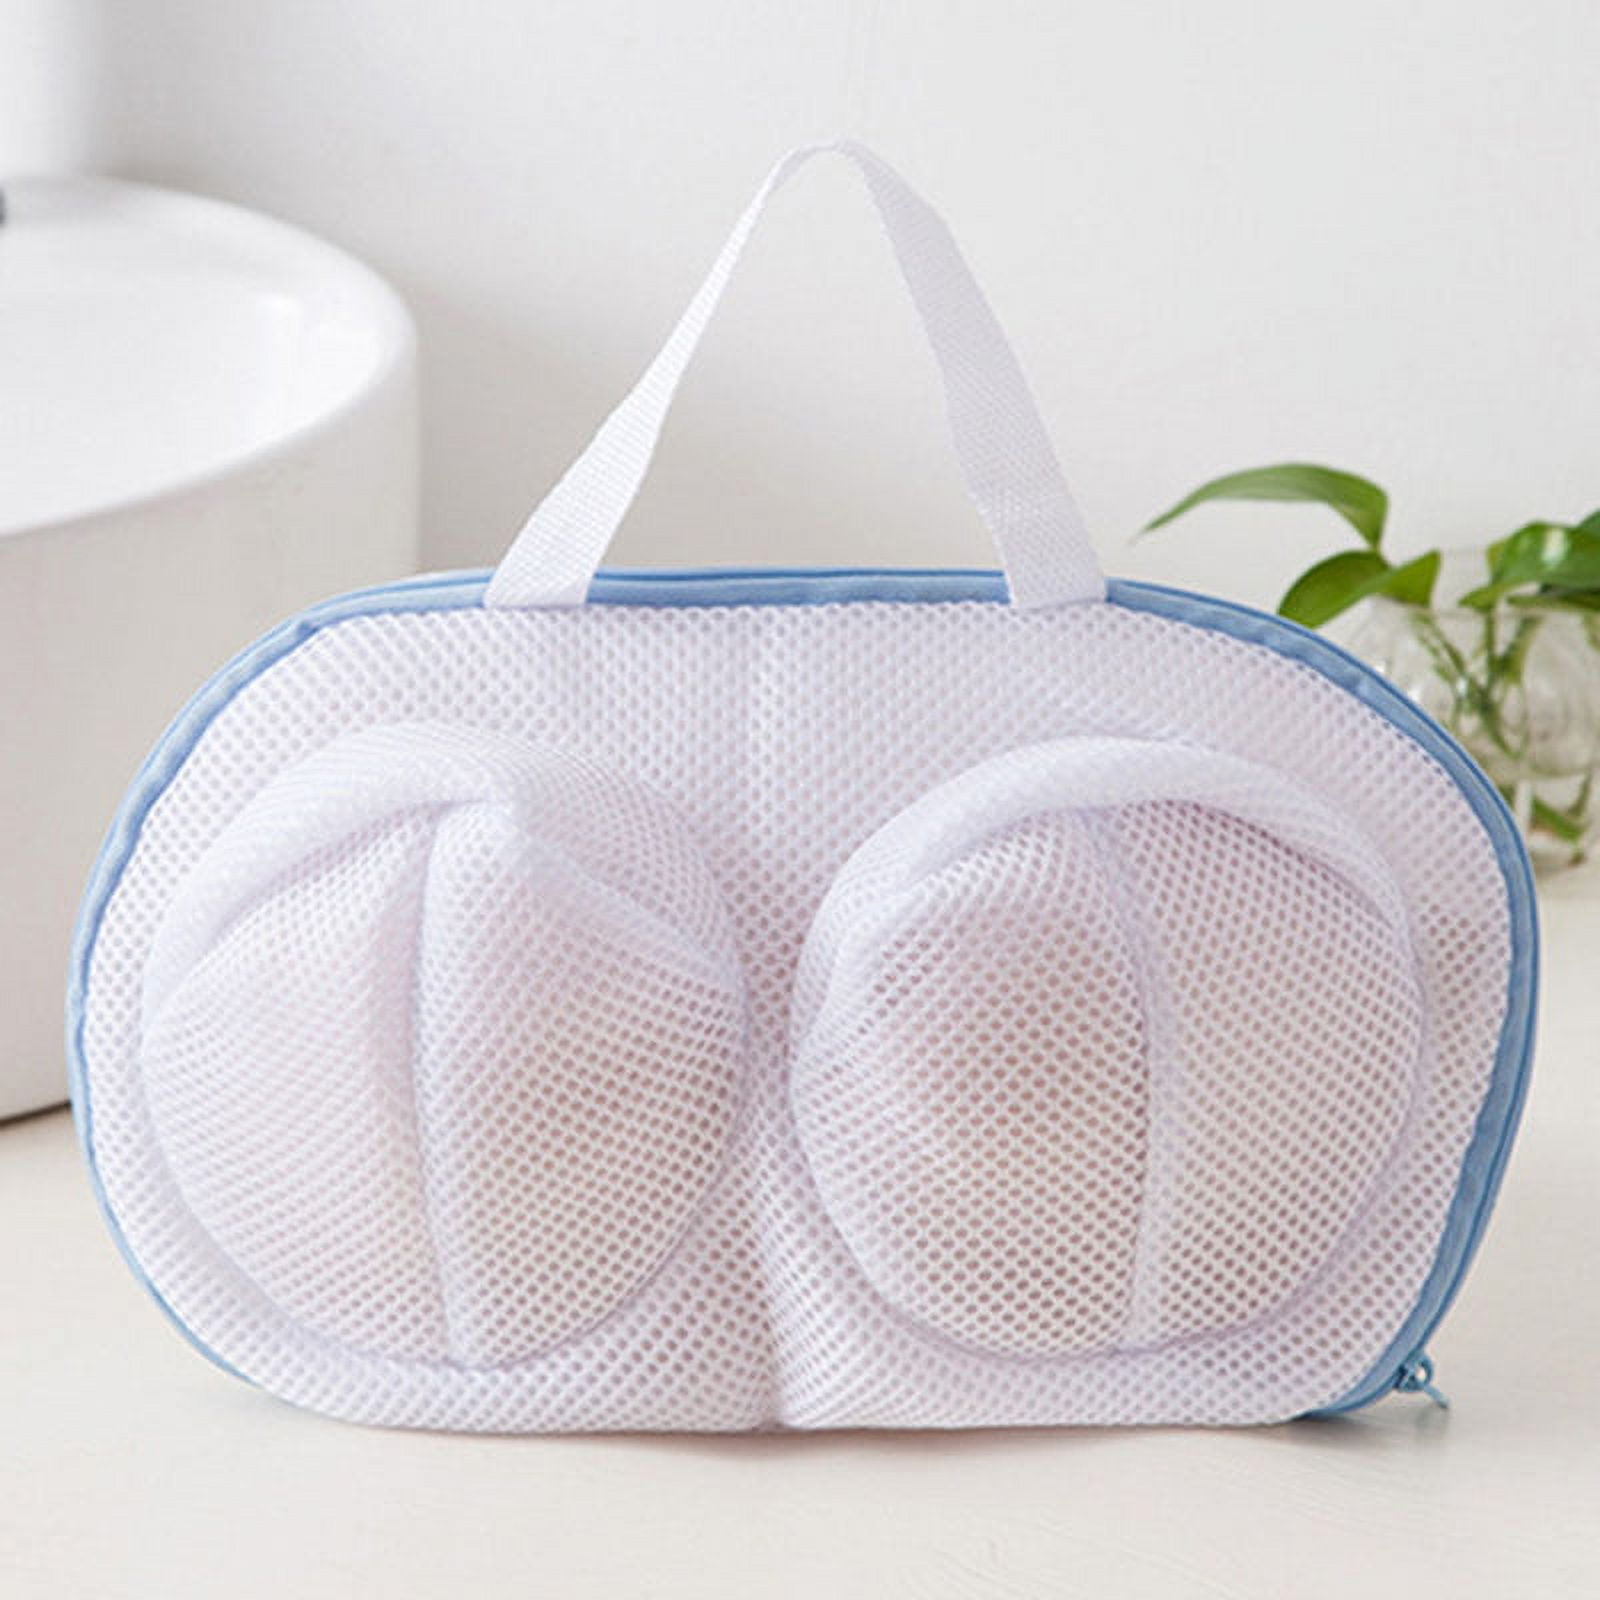 Bra Mesh Laundry Bags Anti-Deformation Lingerie Washing Bag with Handle for Drying  Zipper Closure for Washing Machine New 